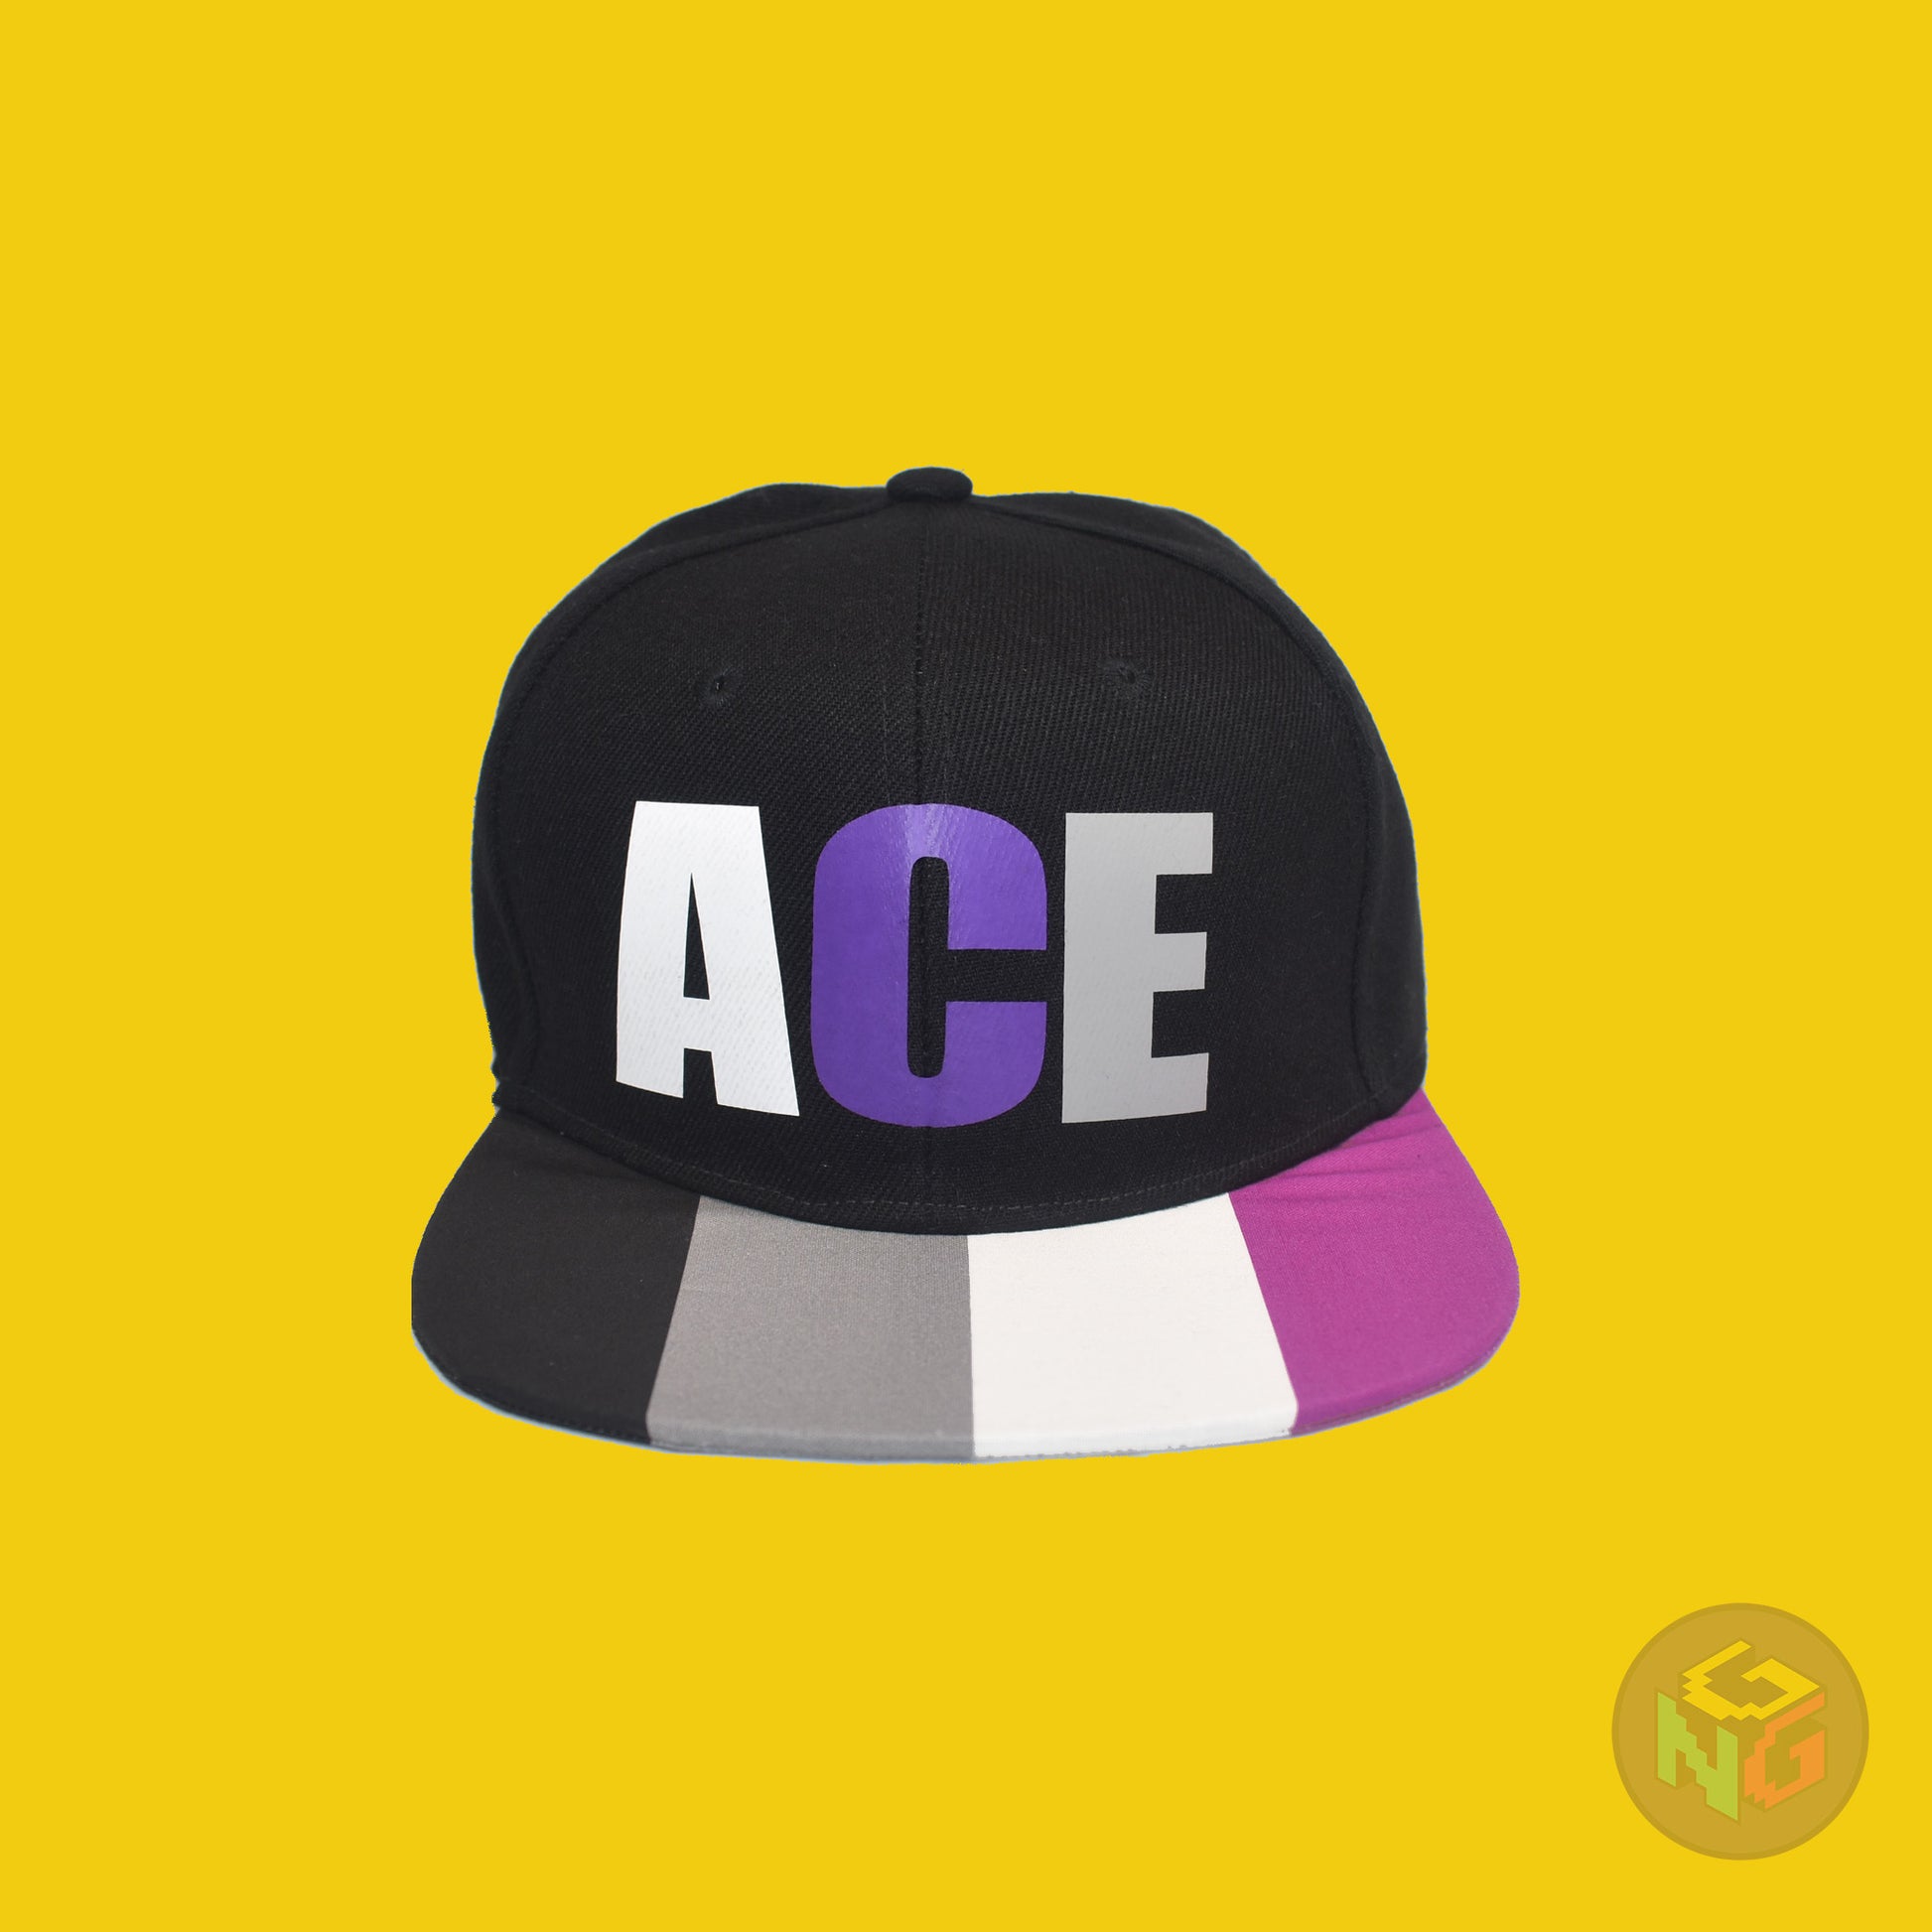 Black flat bill snapback hat. The brim has the asexual pride flag on both sides and the front of the hat has the word “ACE” in white, purple, and grey. Front view